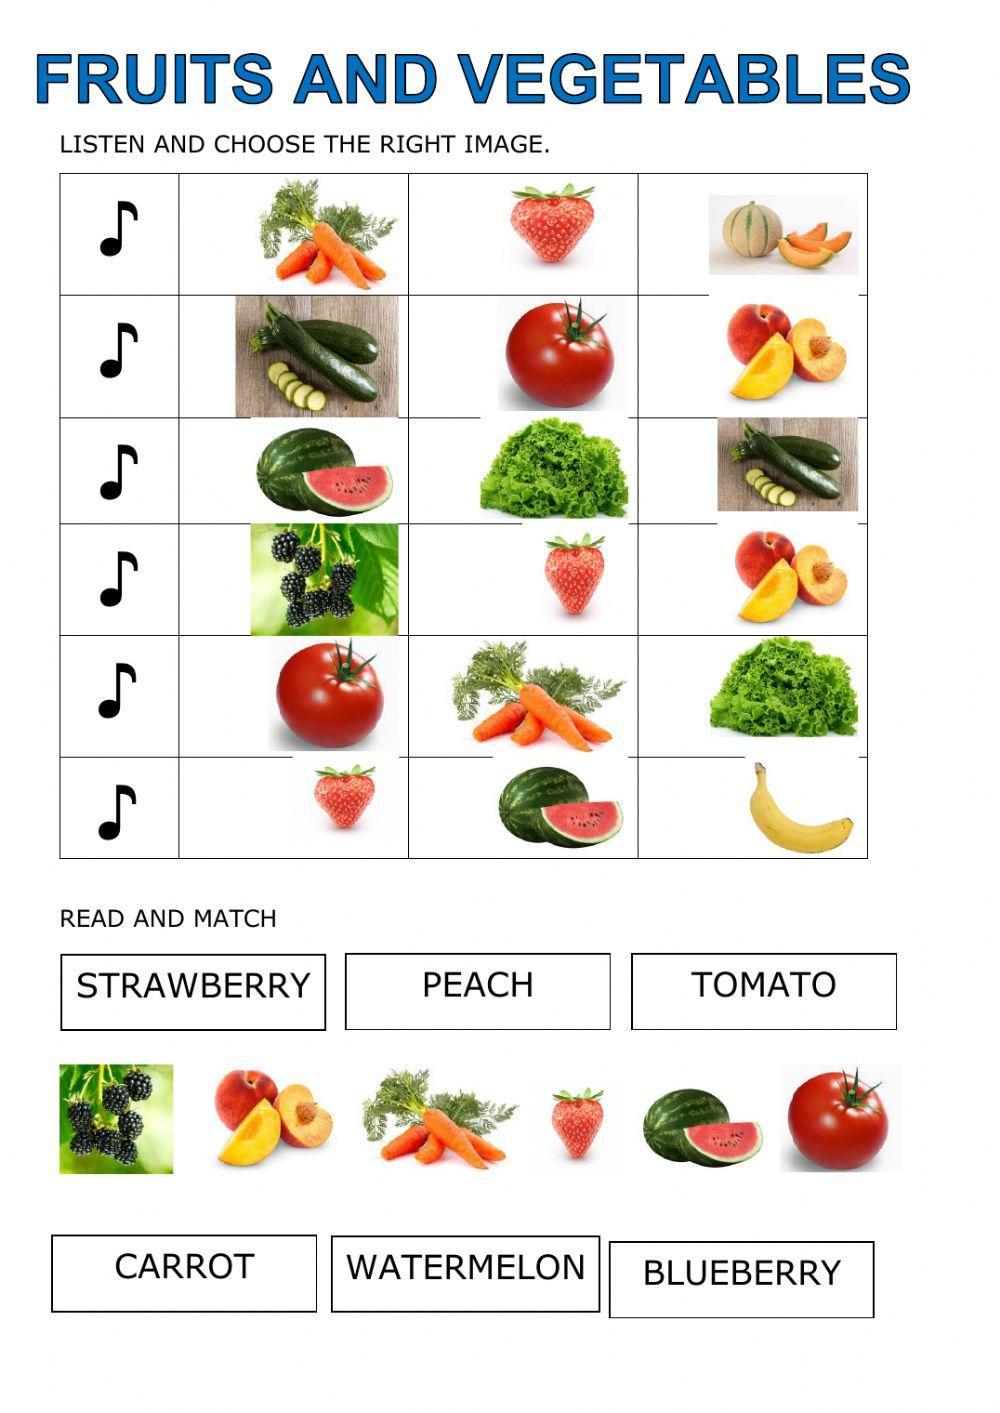 Fruits and vegetables easy